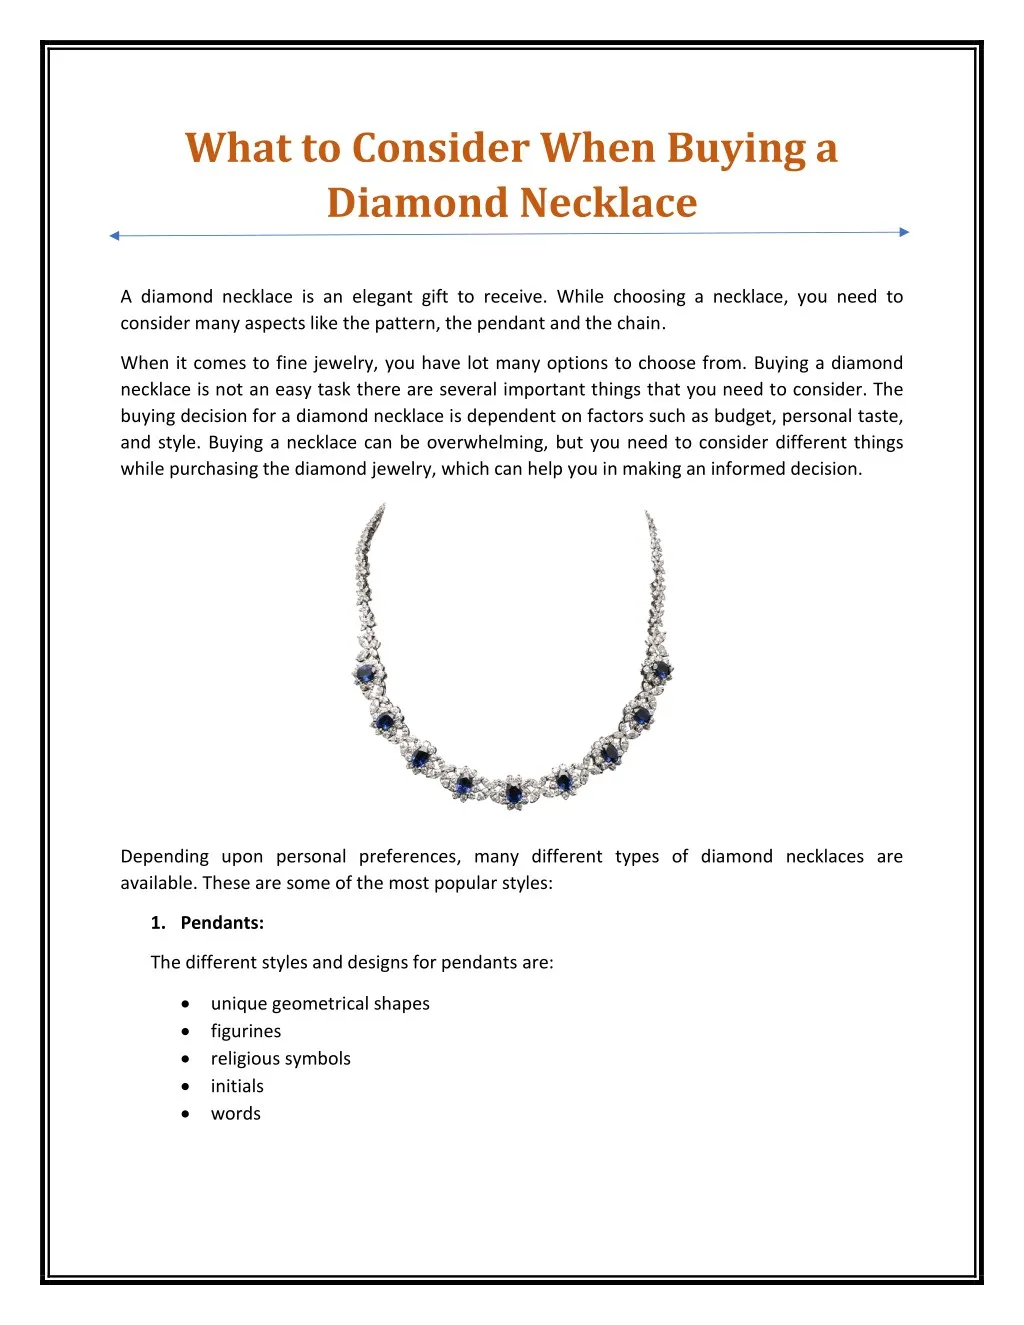 what to consider when buying a diamond necklace